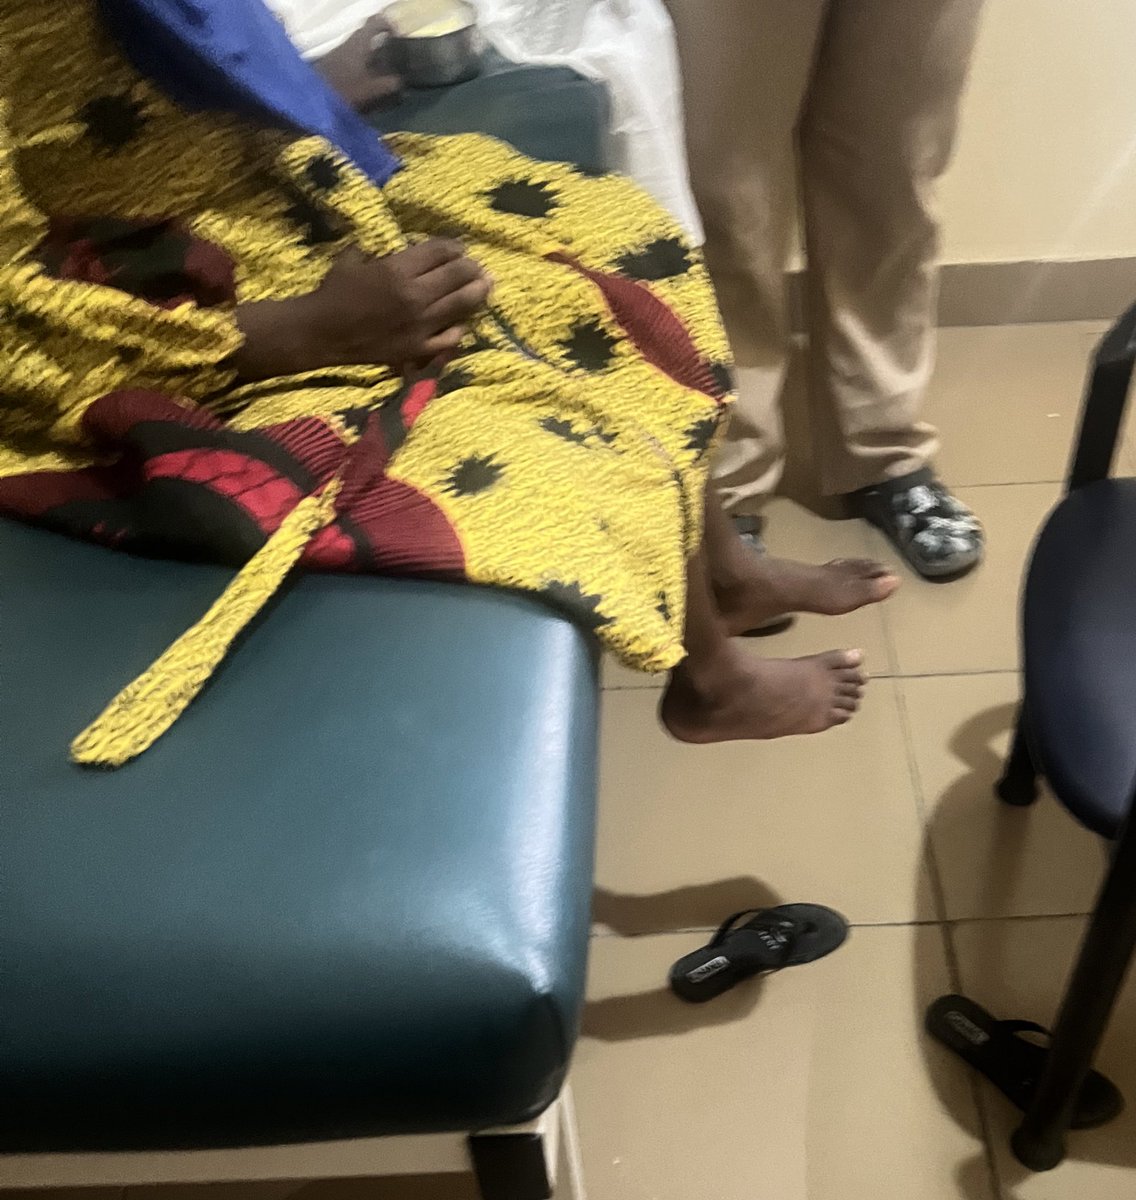 Today 9 cases of Sexual and Gender-Based Violence were reported to @dnfoundation and we’ve been on auto pilot since morning. I never thought I’d end my day at the hospital watching a 3 year old get Swab after Rape. Those tiny legs 😭💔💔💔💔